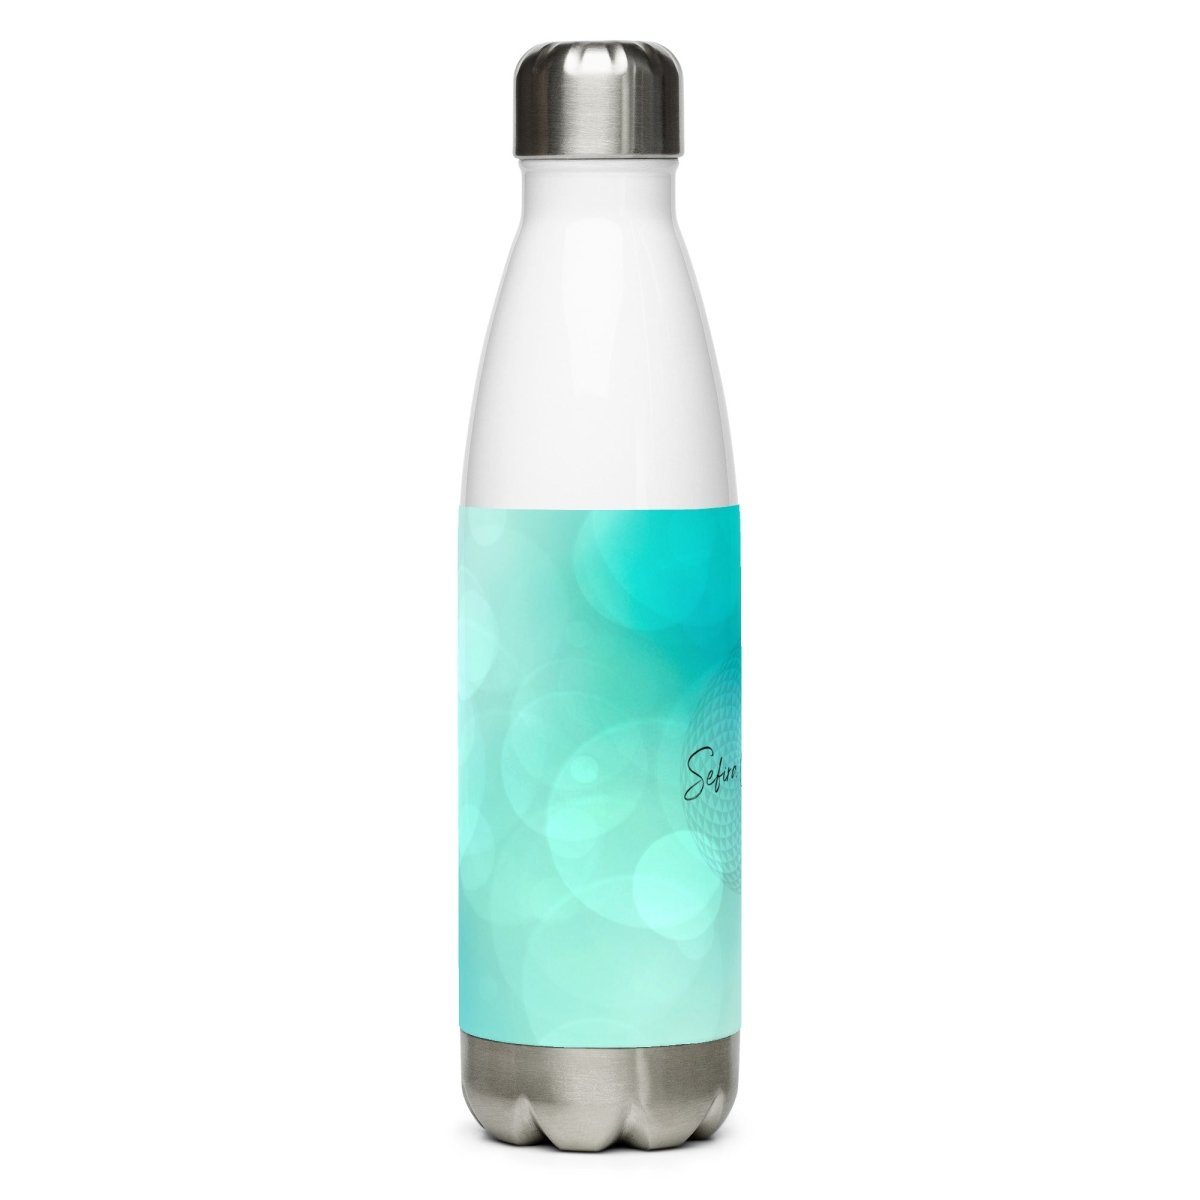 Sefira Stainless Steel Water Bottle | Sefira Home Collection - Sefira Collections